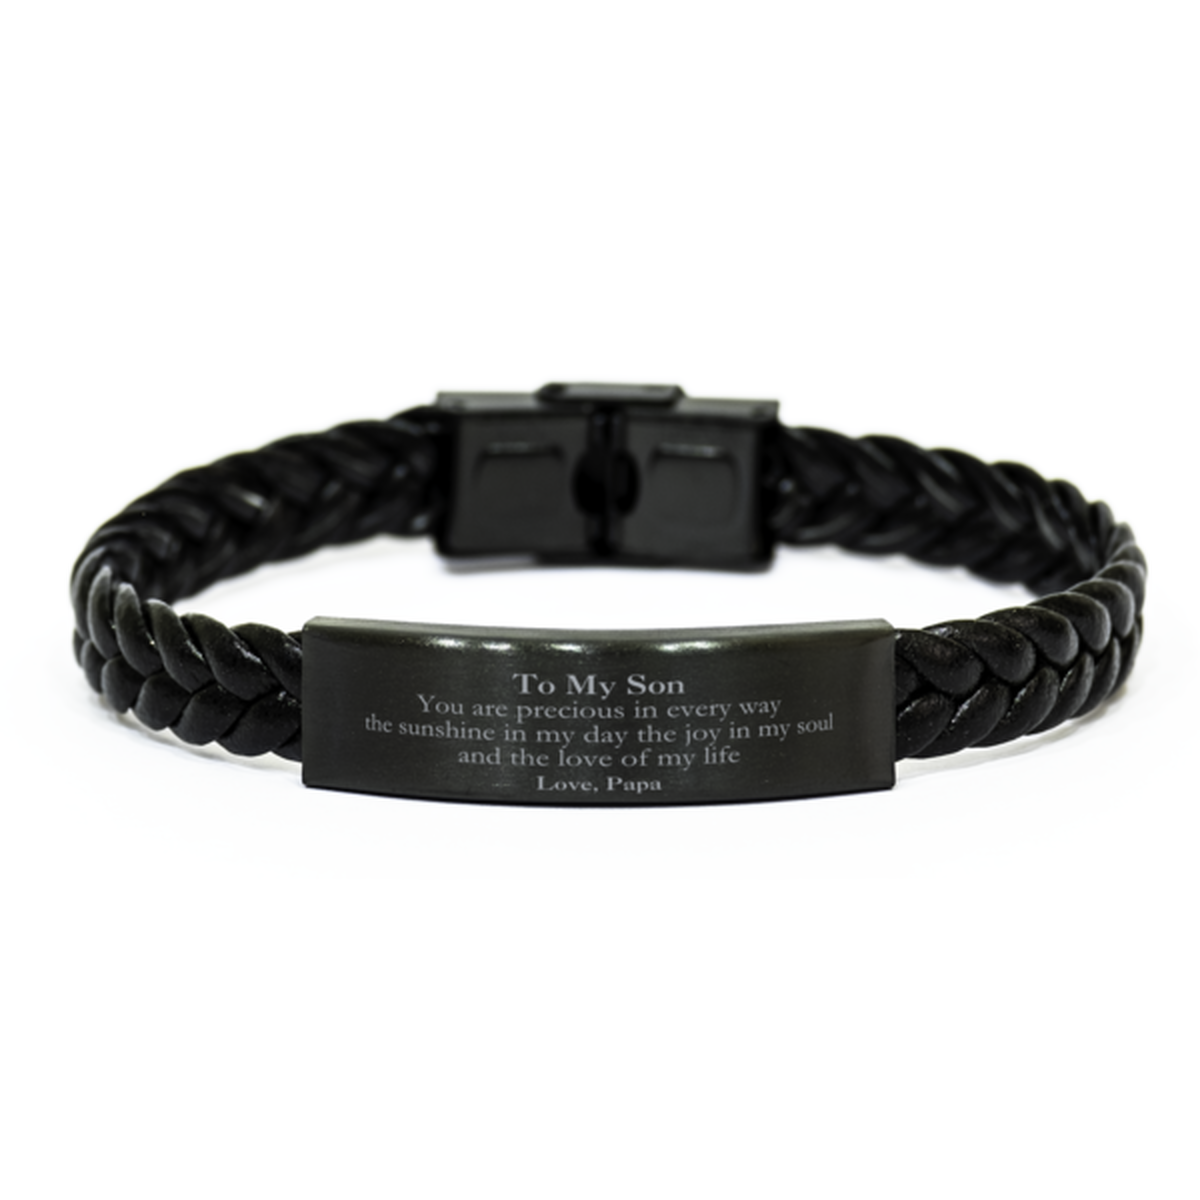 Graduation Gifts for Son Braided Leather Bracelet Present from Papa, Christmas Son Birthday Gifts Son You are precious in every way the sunshine in my day. Love, Papa